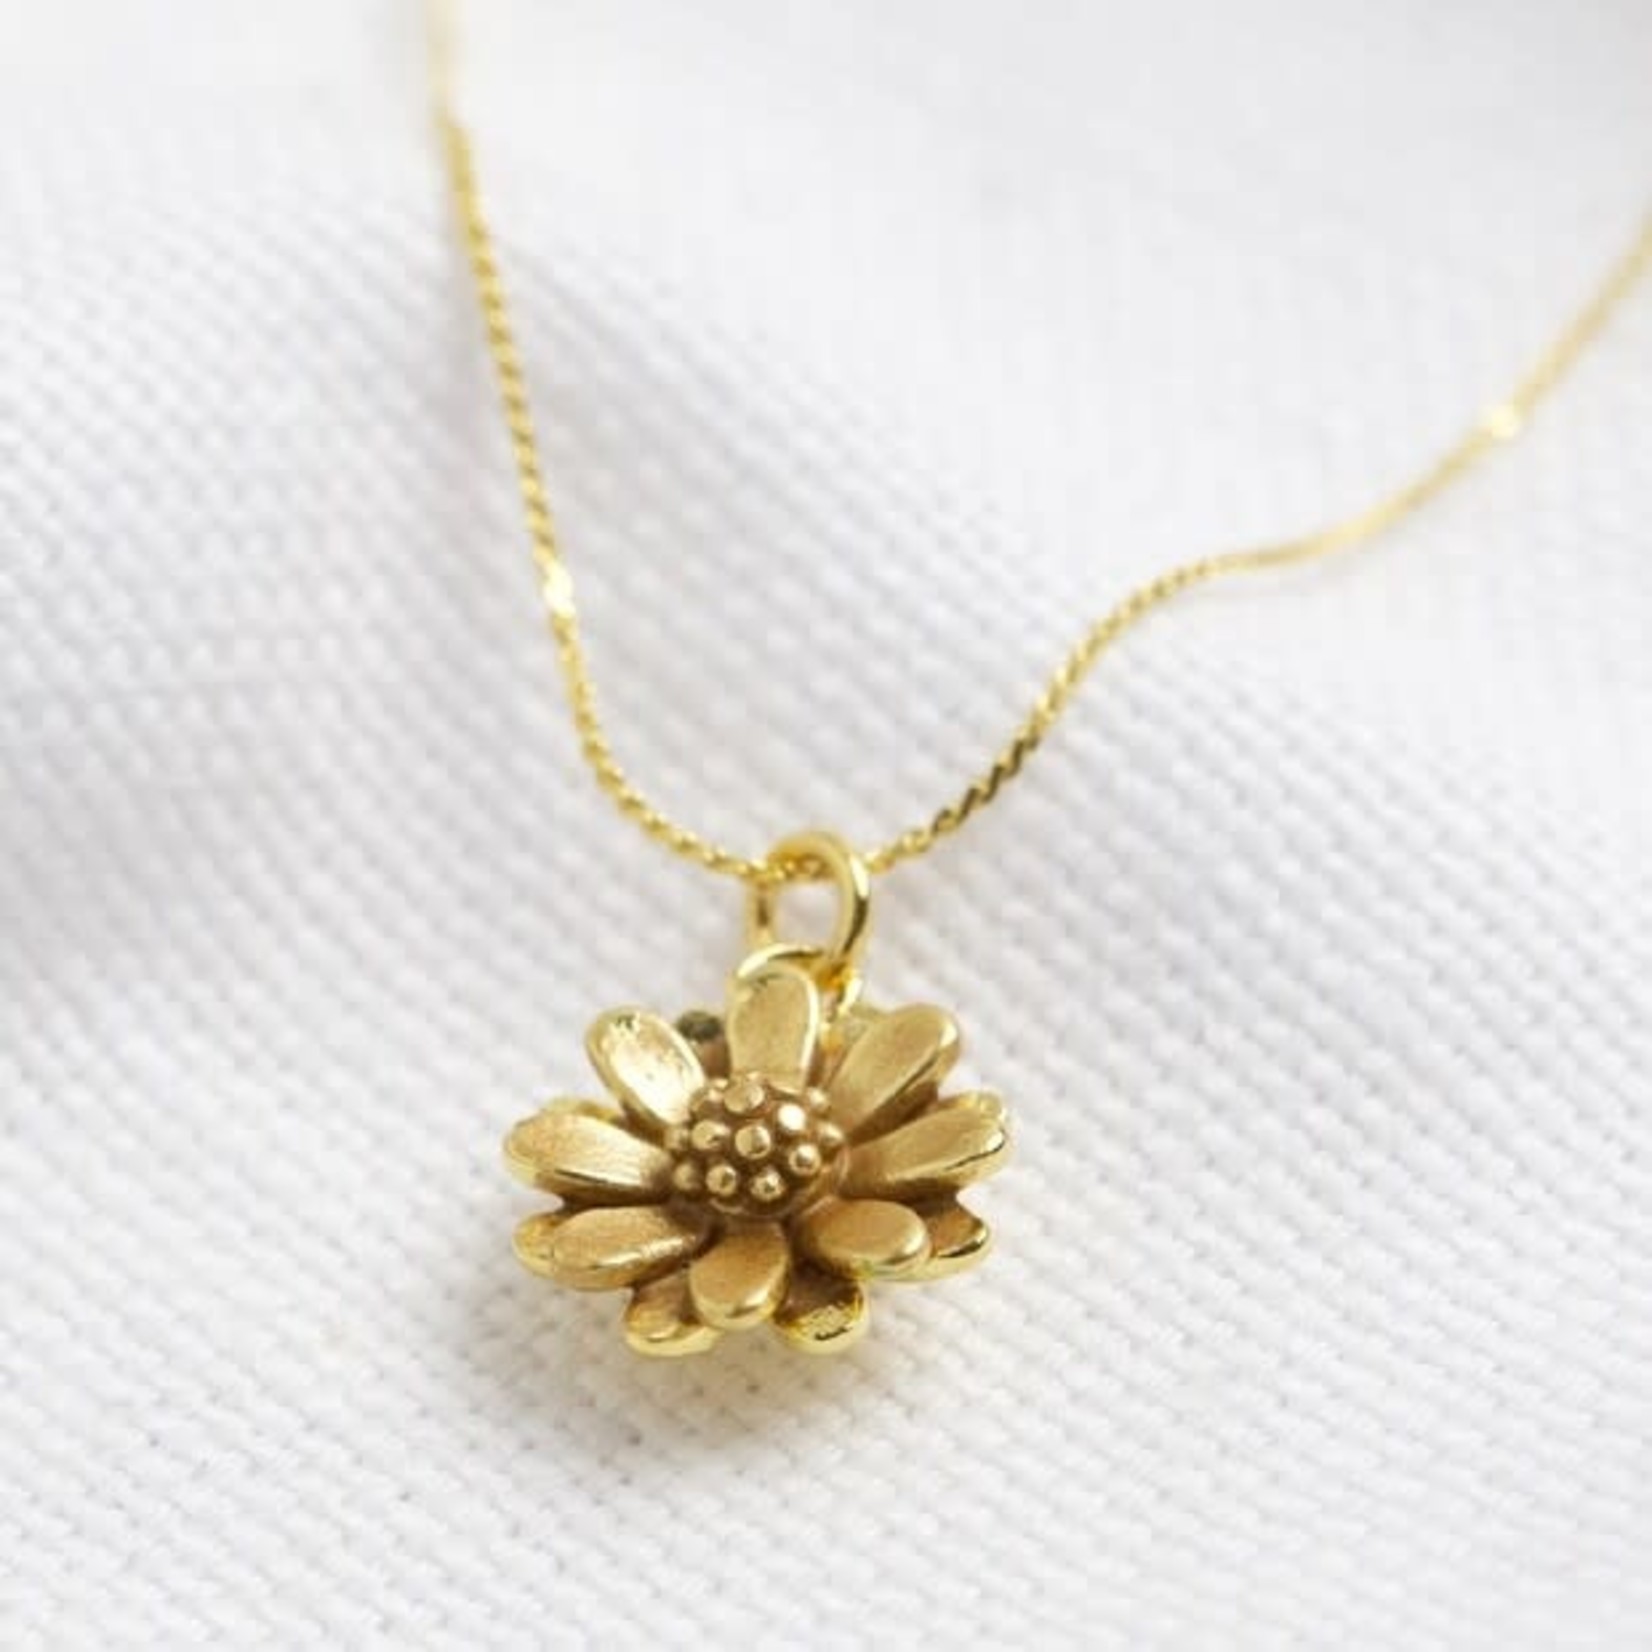 Lisa Angel Tiny Gold Daisy Pendant Delicate Necklace